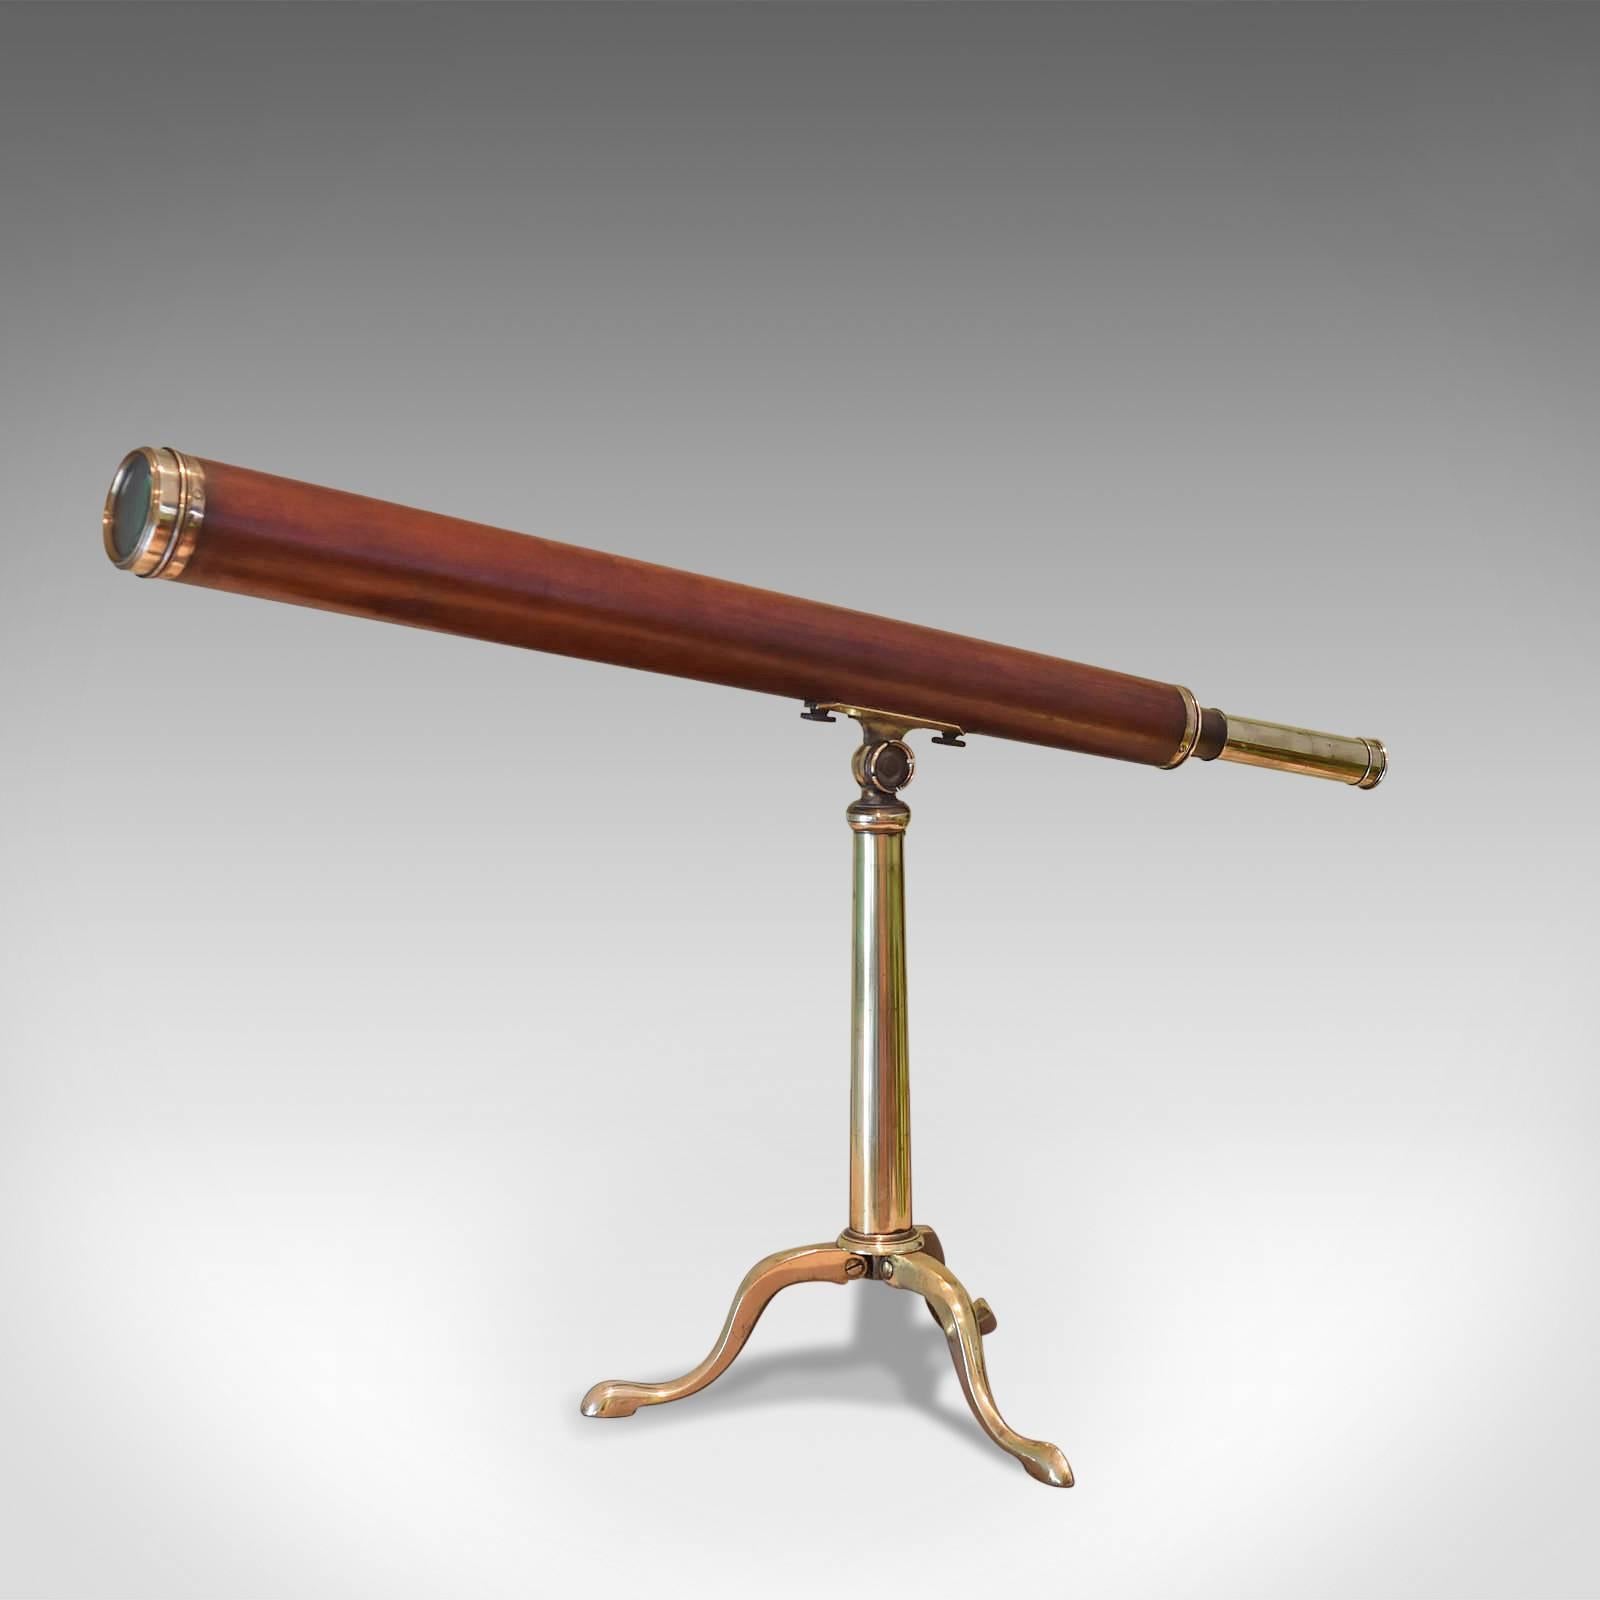 This is an antique Dollond, achromatic library telescope, circa 1790.

Mounted on a solid brass tripod stand with cabriole legs and spade feet the mount allows fluid movement in both the horizontal and vertical planes.

The telescope consists of